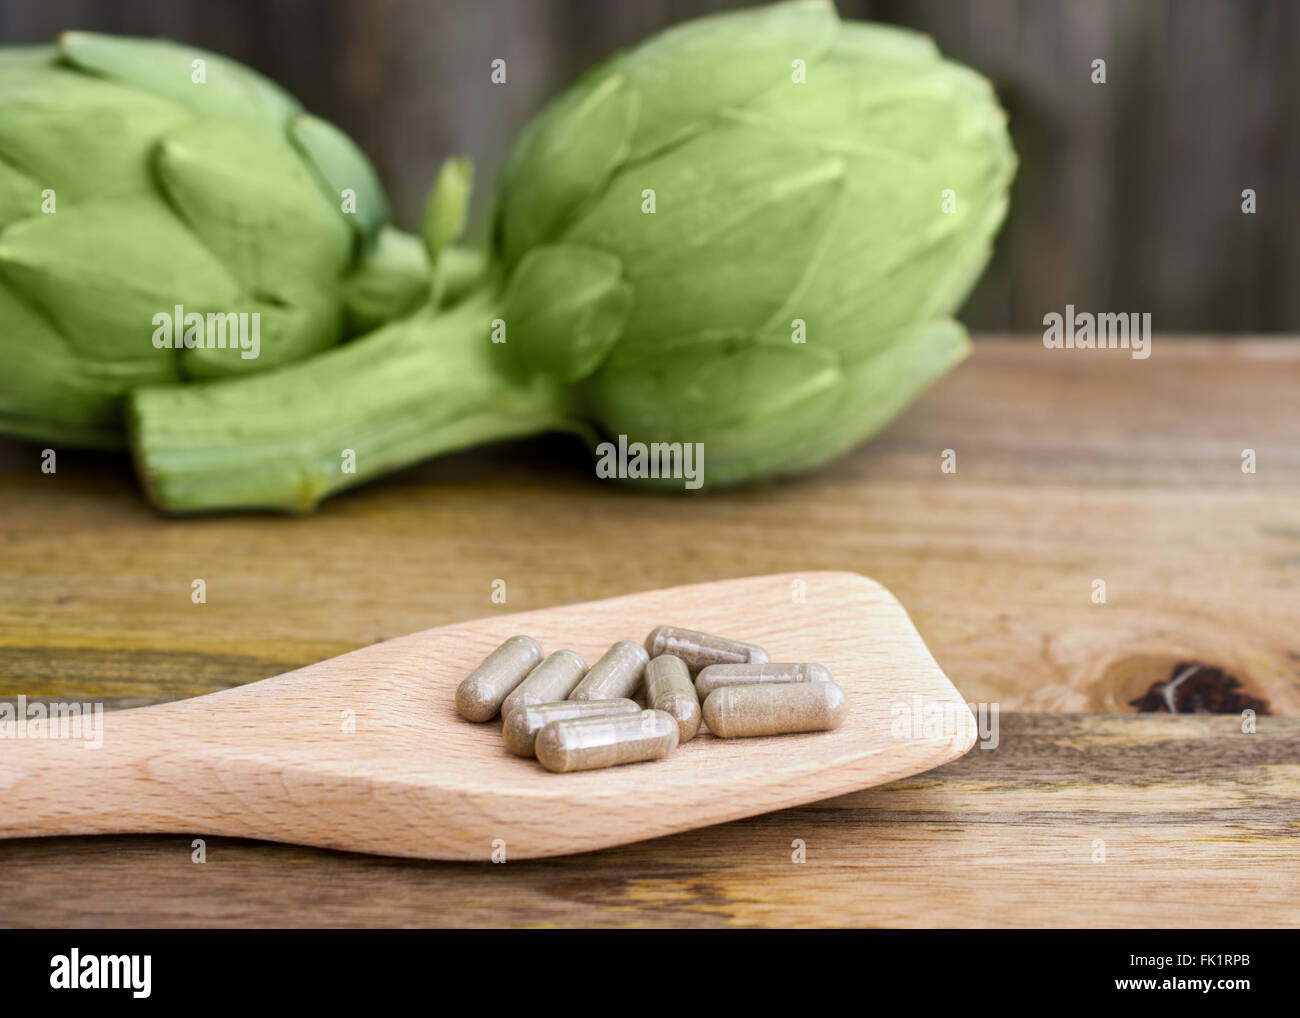 Selective focus on Artichoke supplements on wooden spoon, with out of focus Artichoke in the background, on wooden table Stock Photo